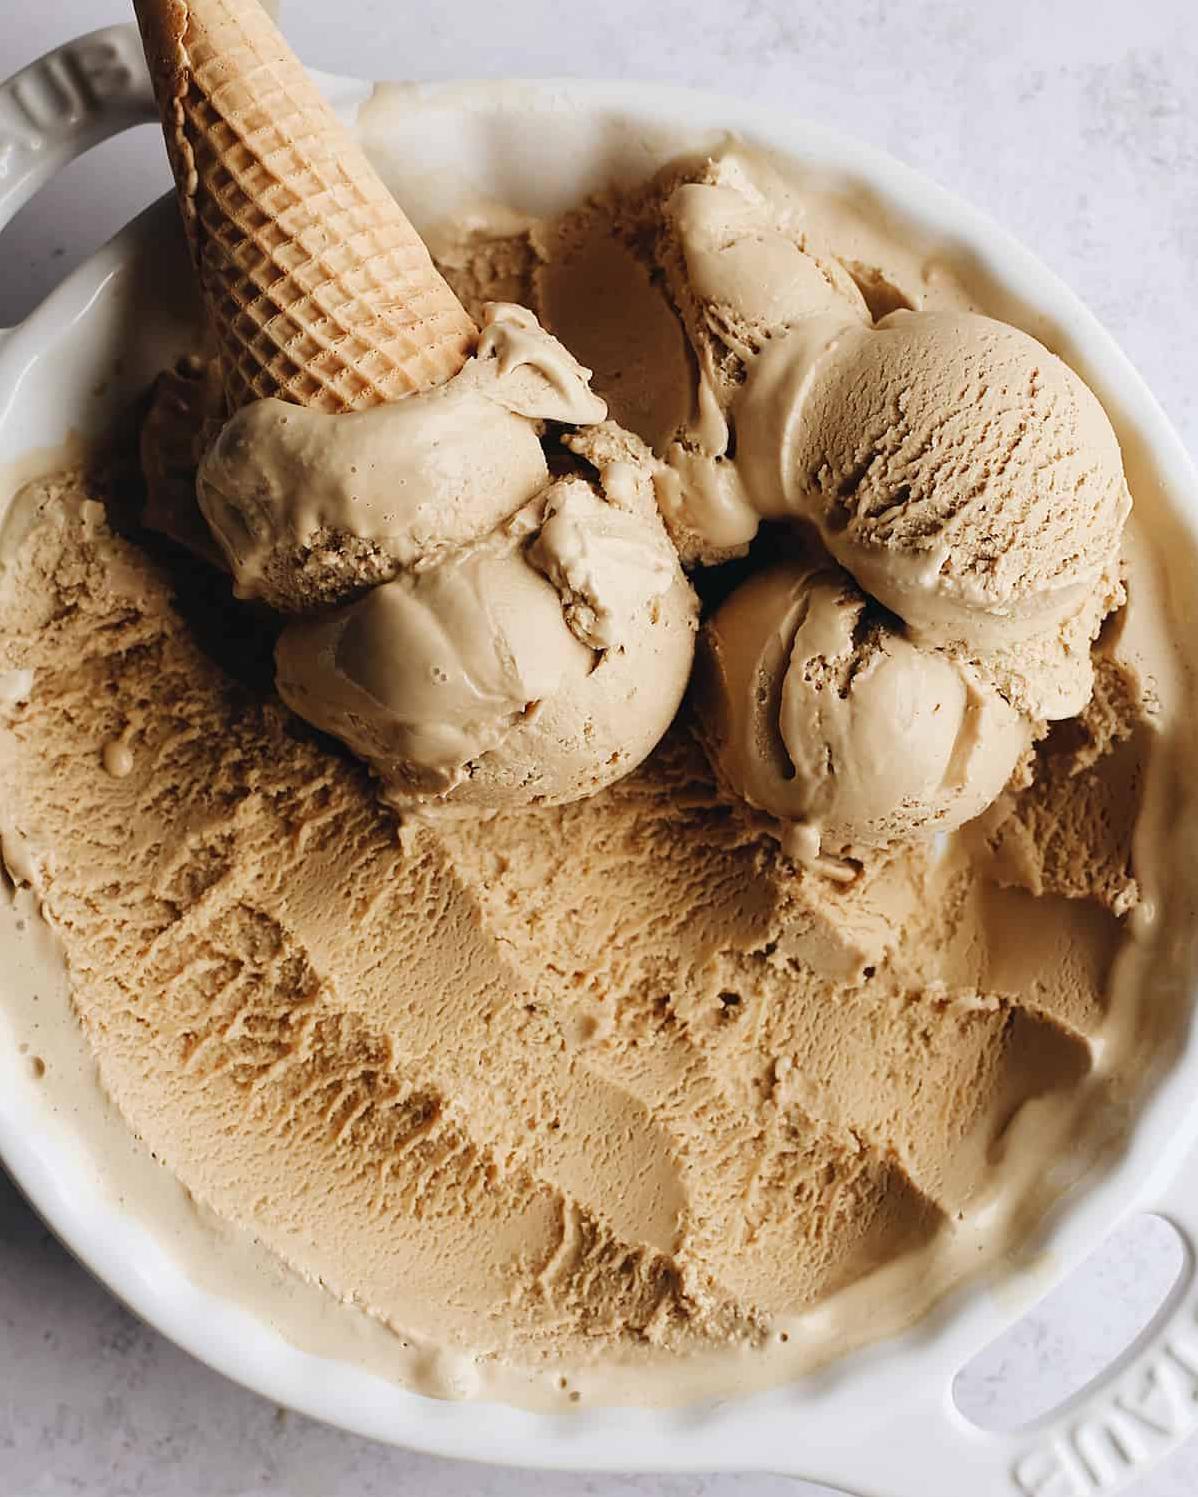  Treat yourself to a decadent dessert with this easy coffee ice cream recipe.